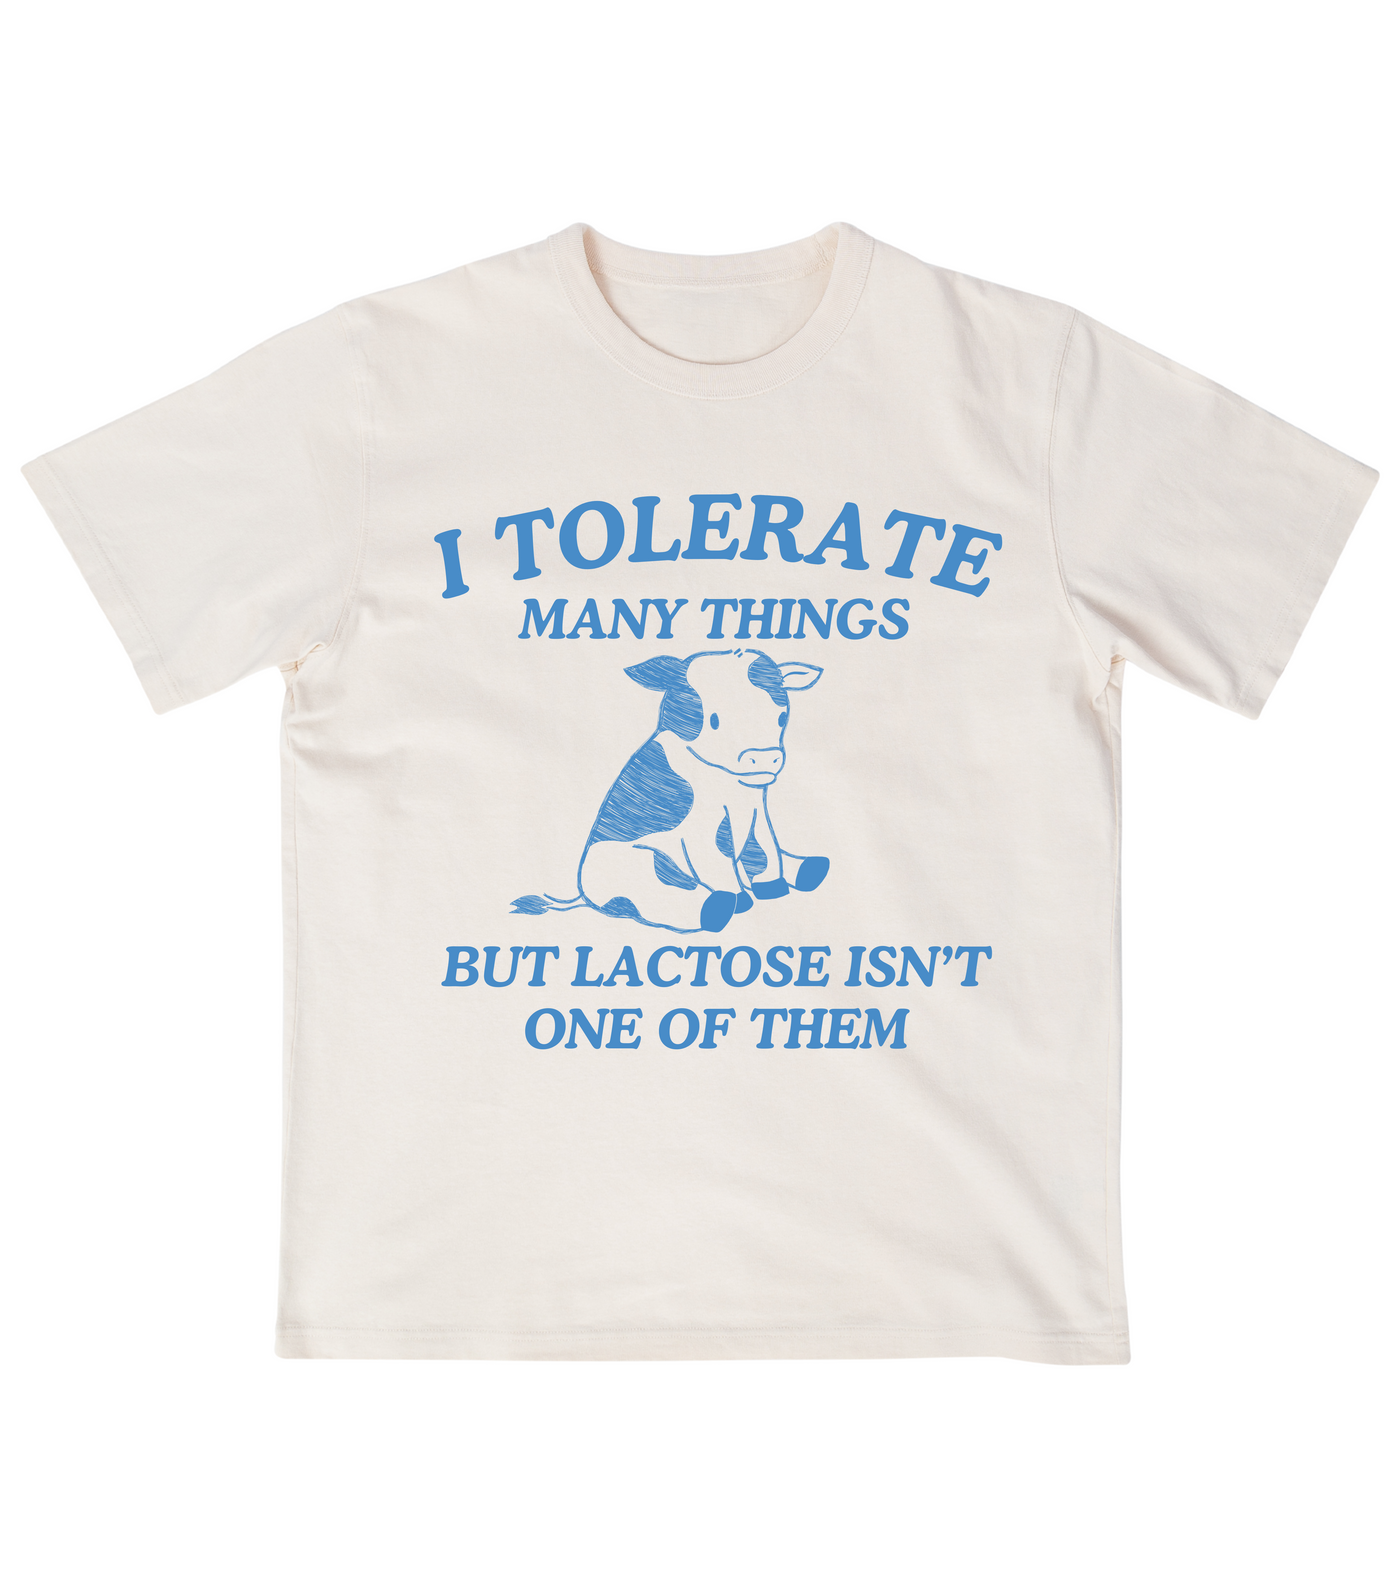 I Tolerate Many Things But Lactose Isn't One Of Them